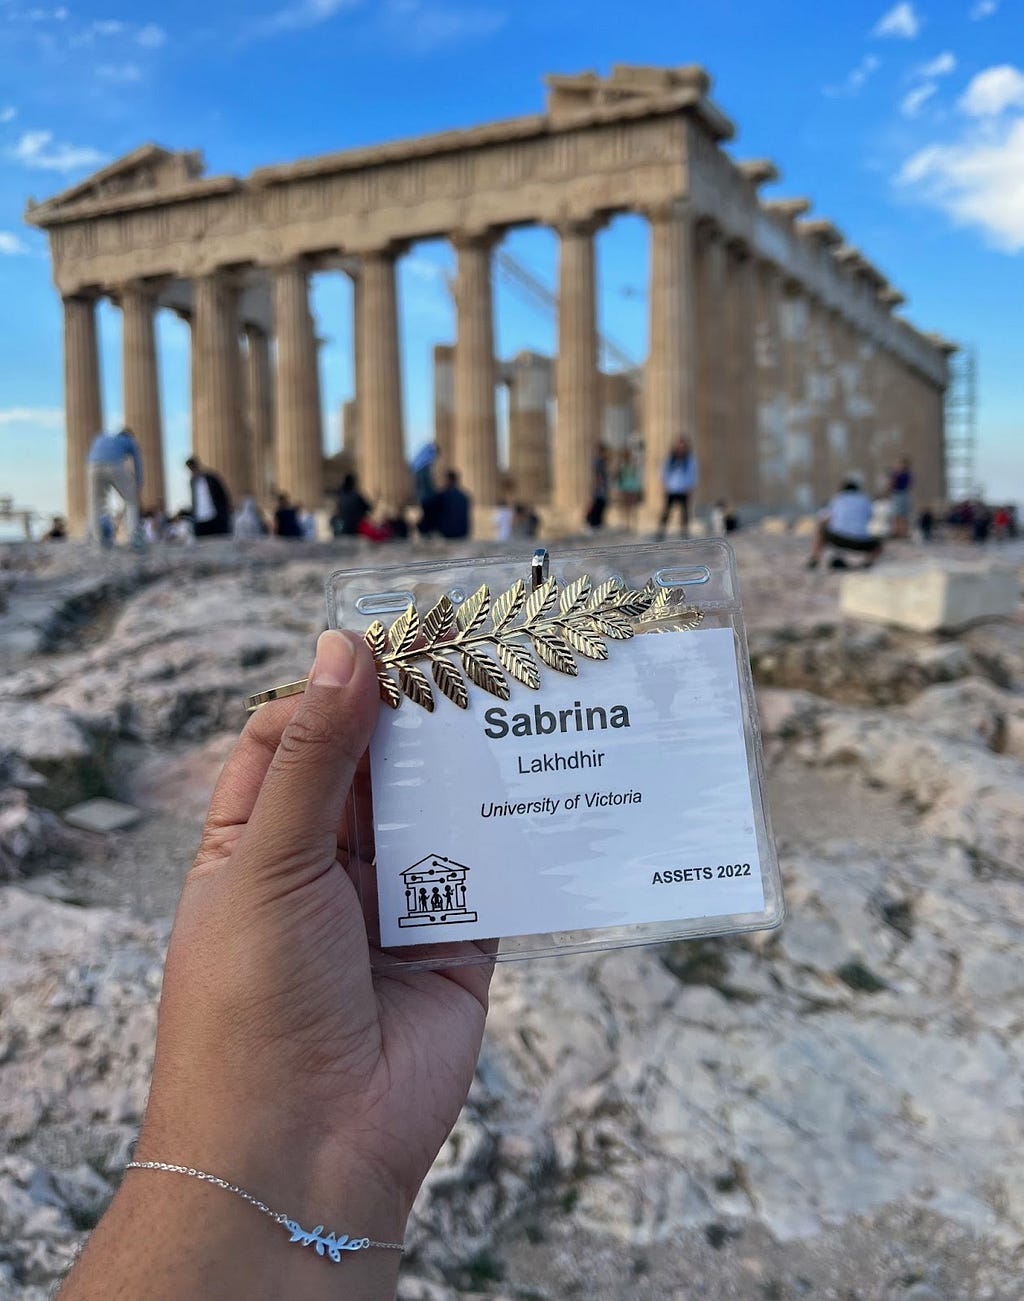 An image of the author’s nametag from the conference stating their name, their affiliation (University of Victoria) and the conference name and logo in front of the Parthenon.